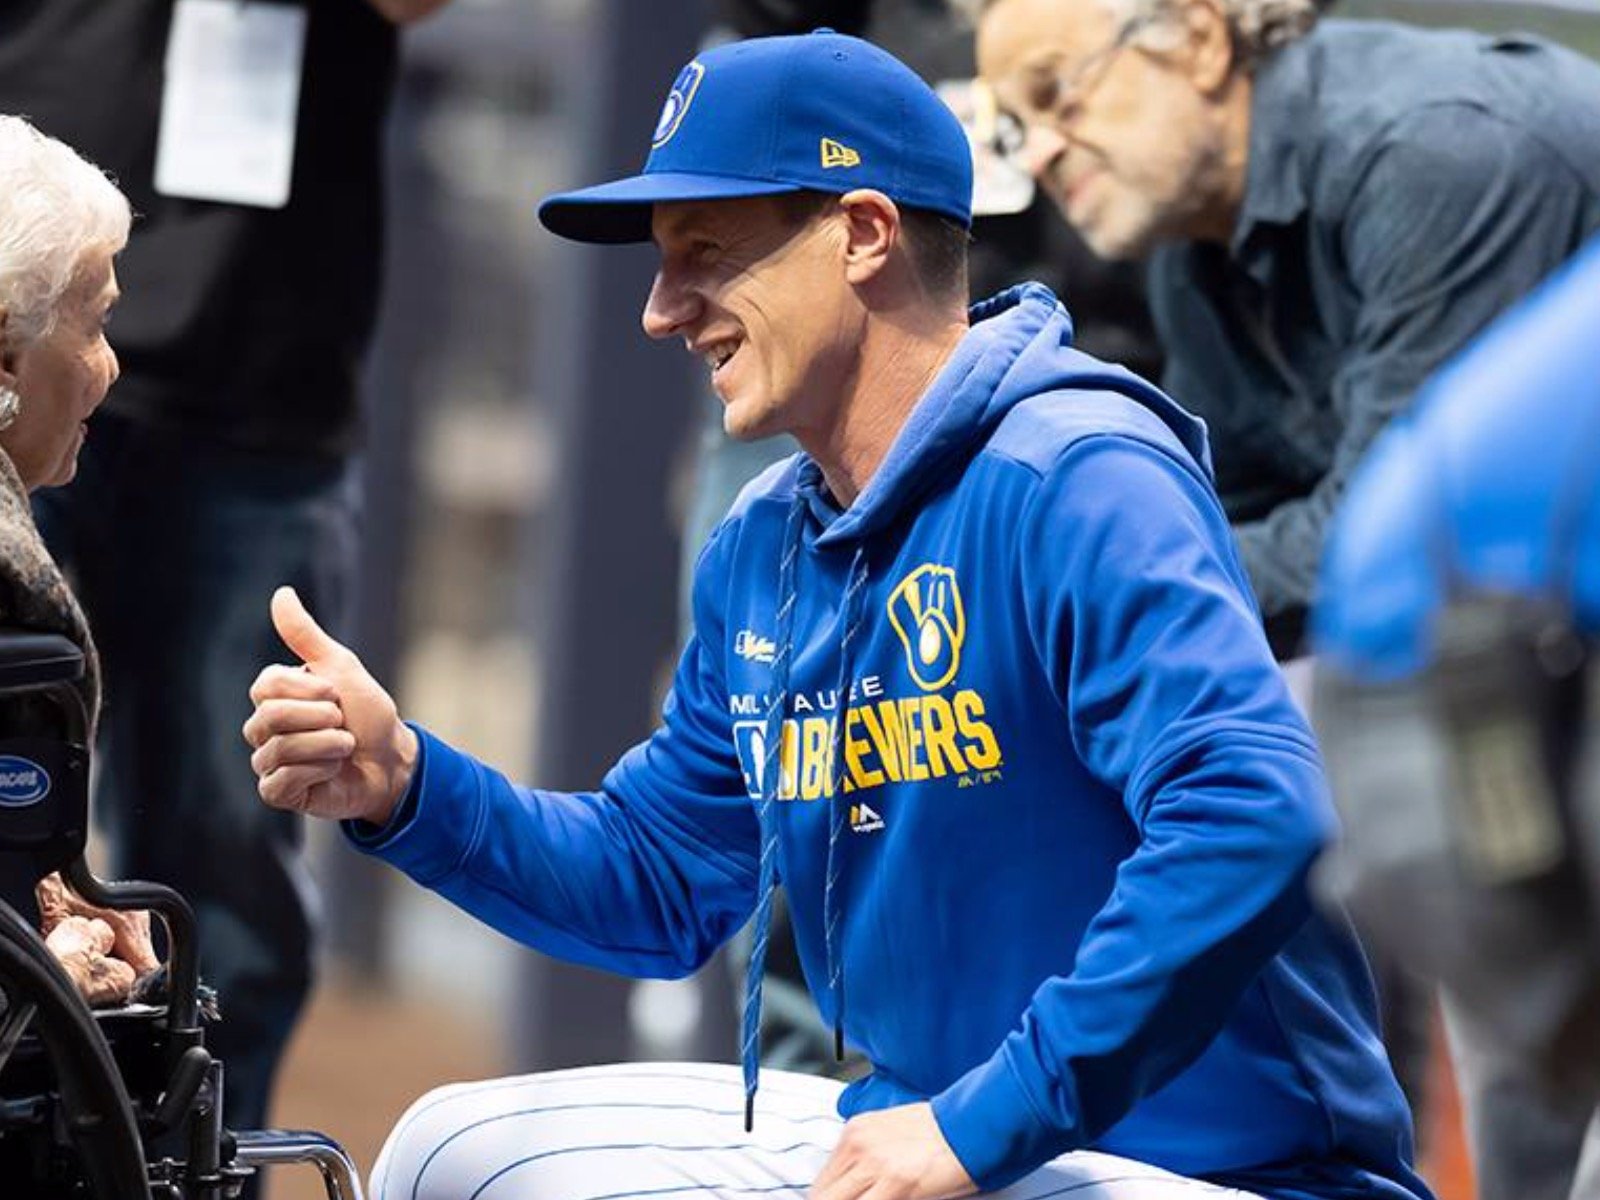 Craig Counsell, new Brewers manager, had an all-time great batting